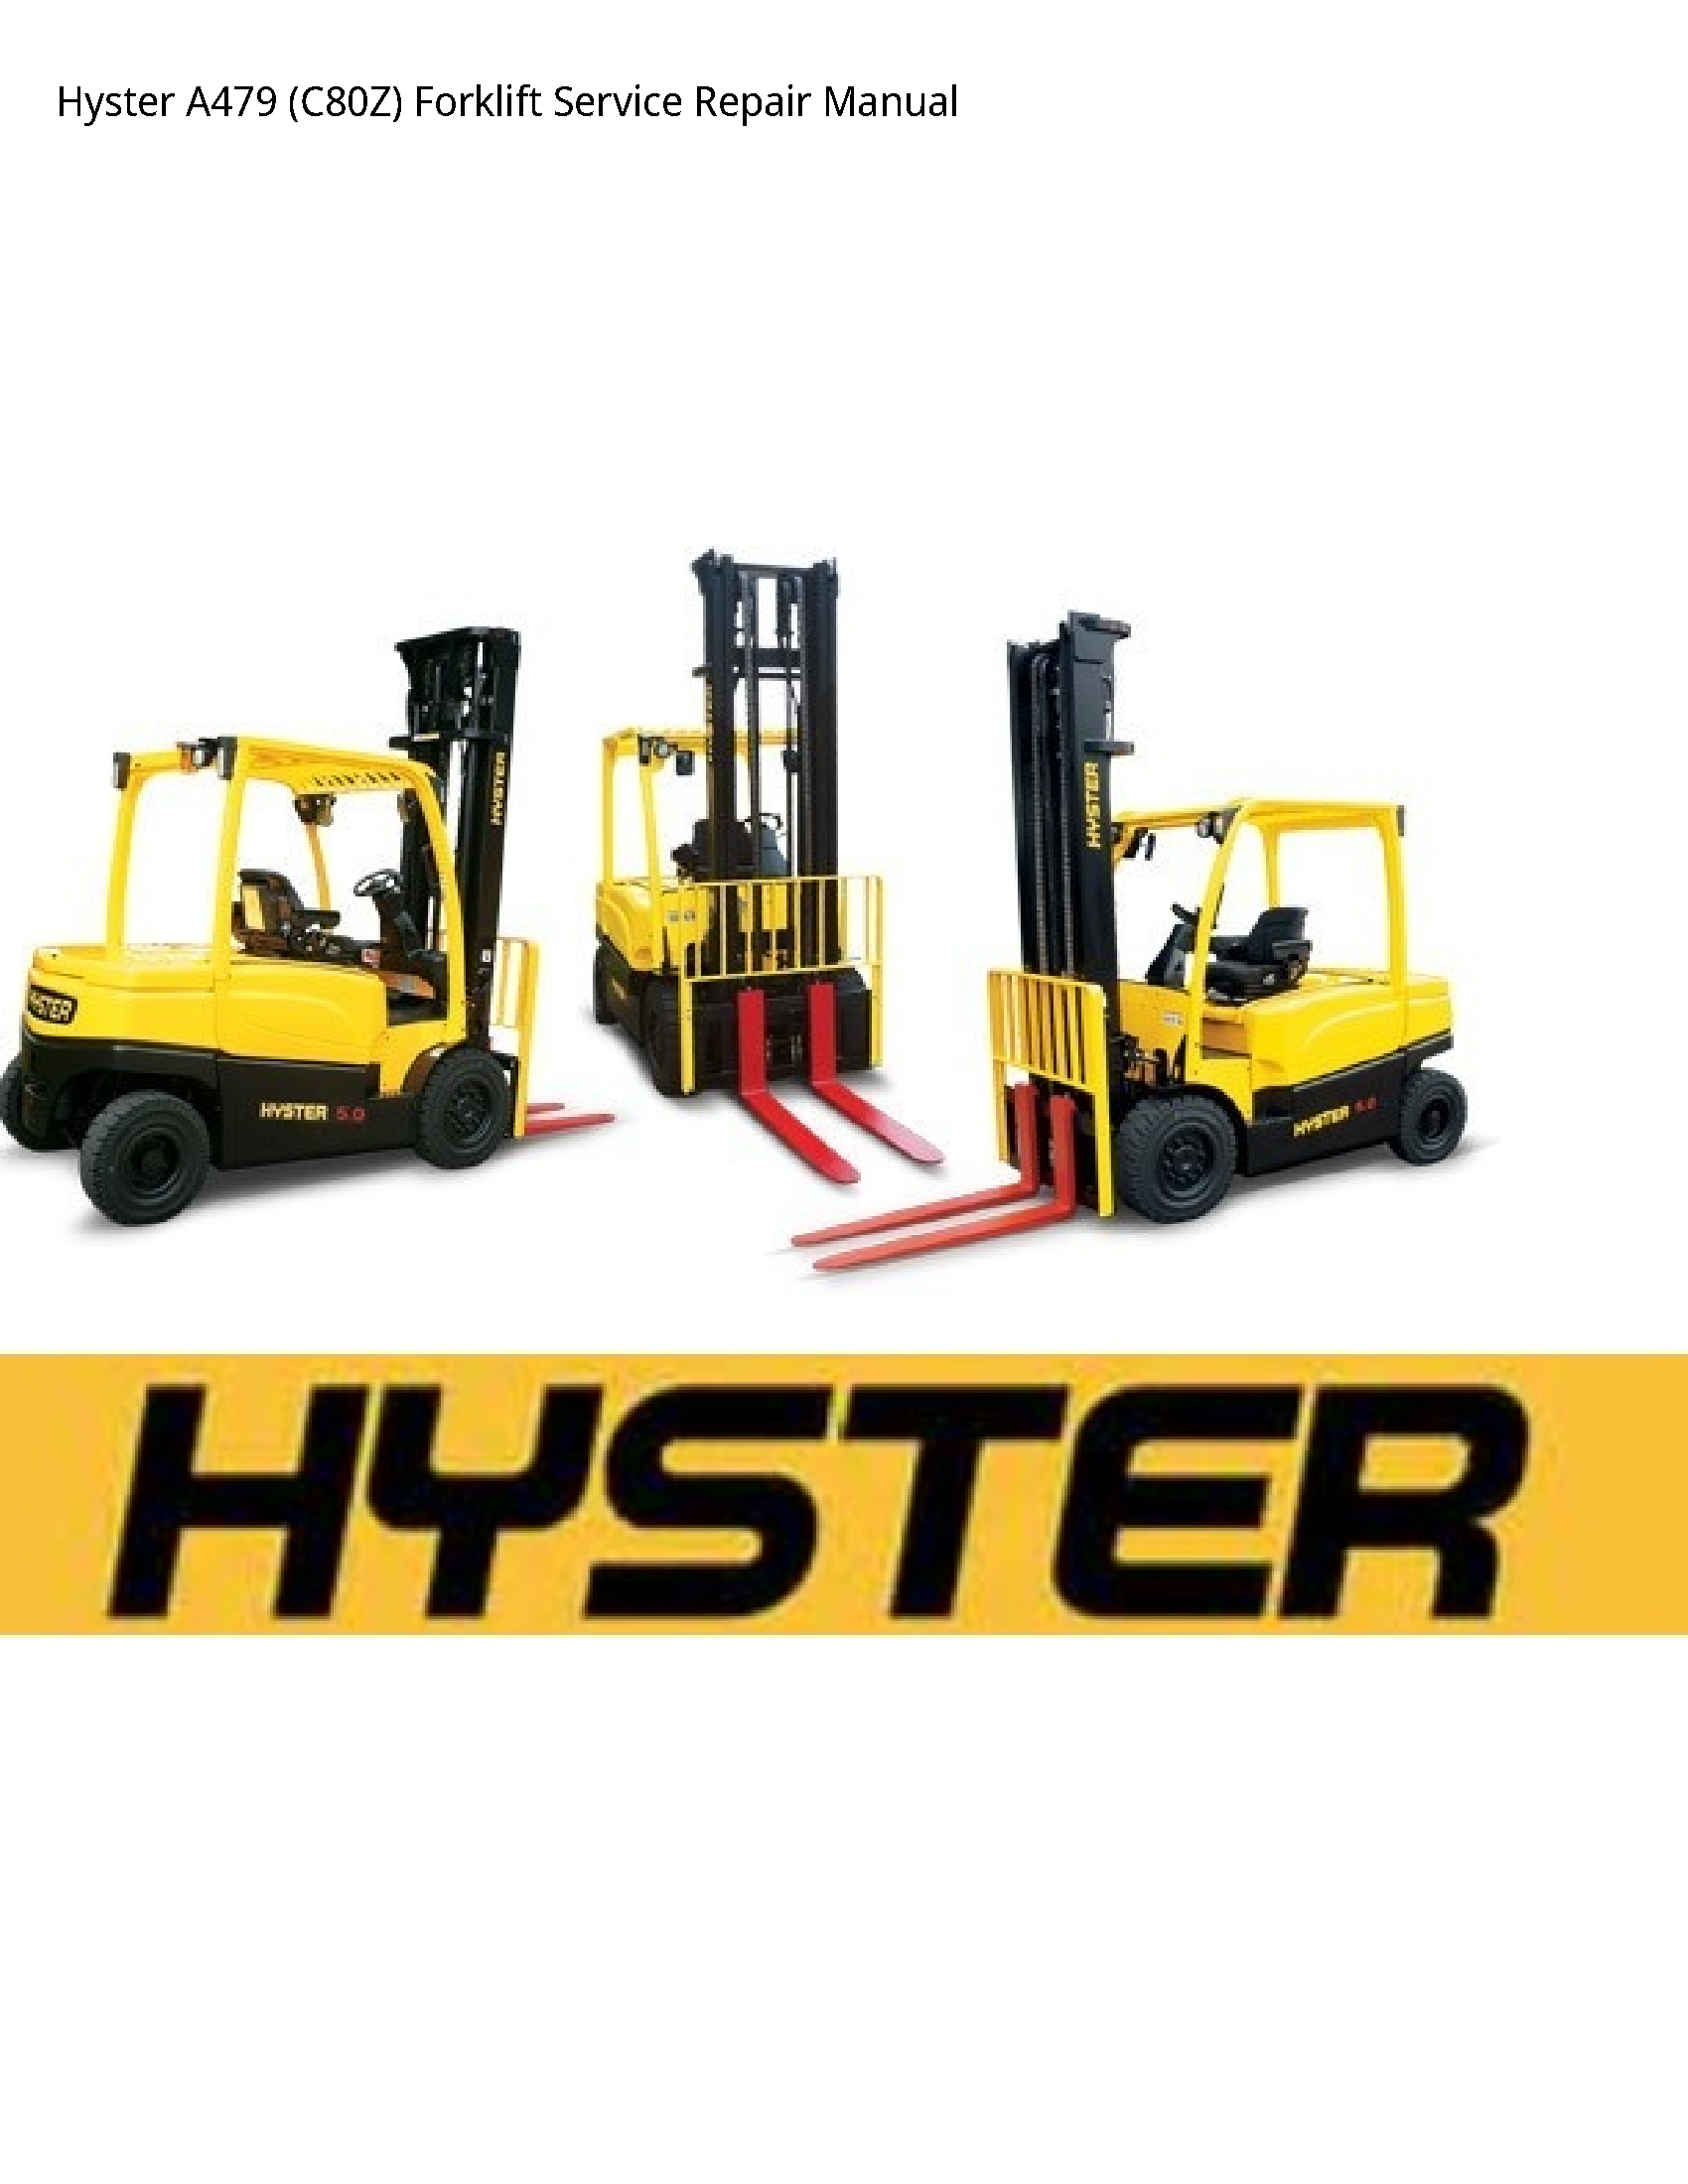 Hyster A479 Forklift manual